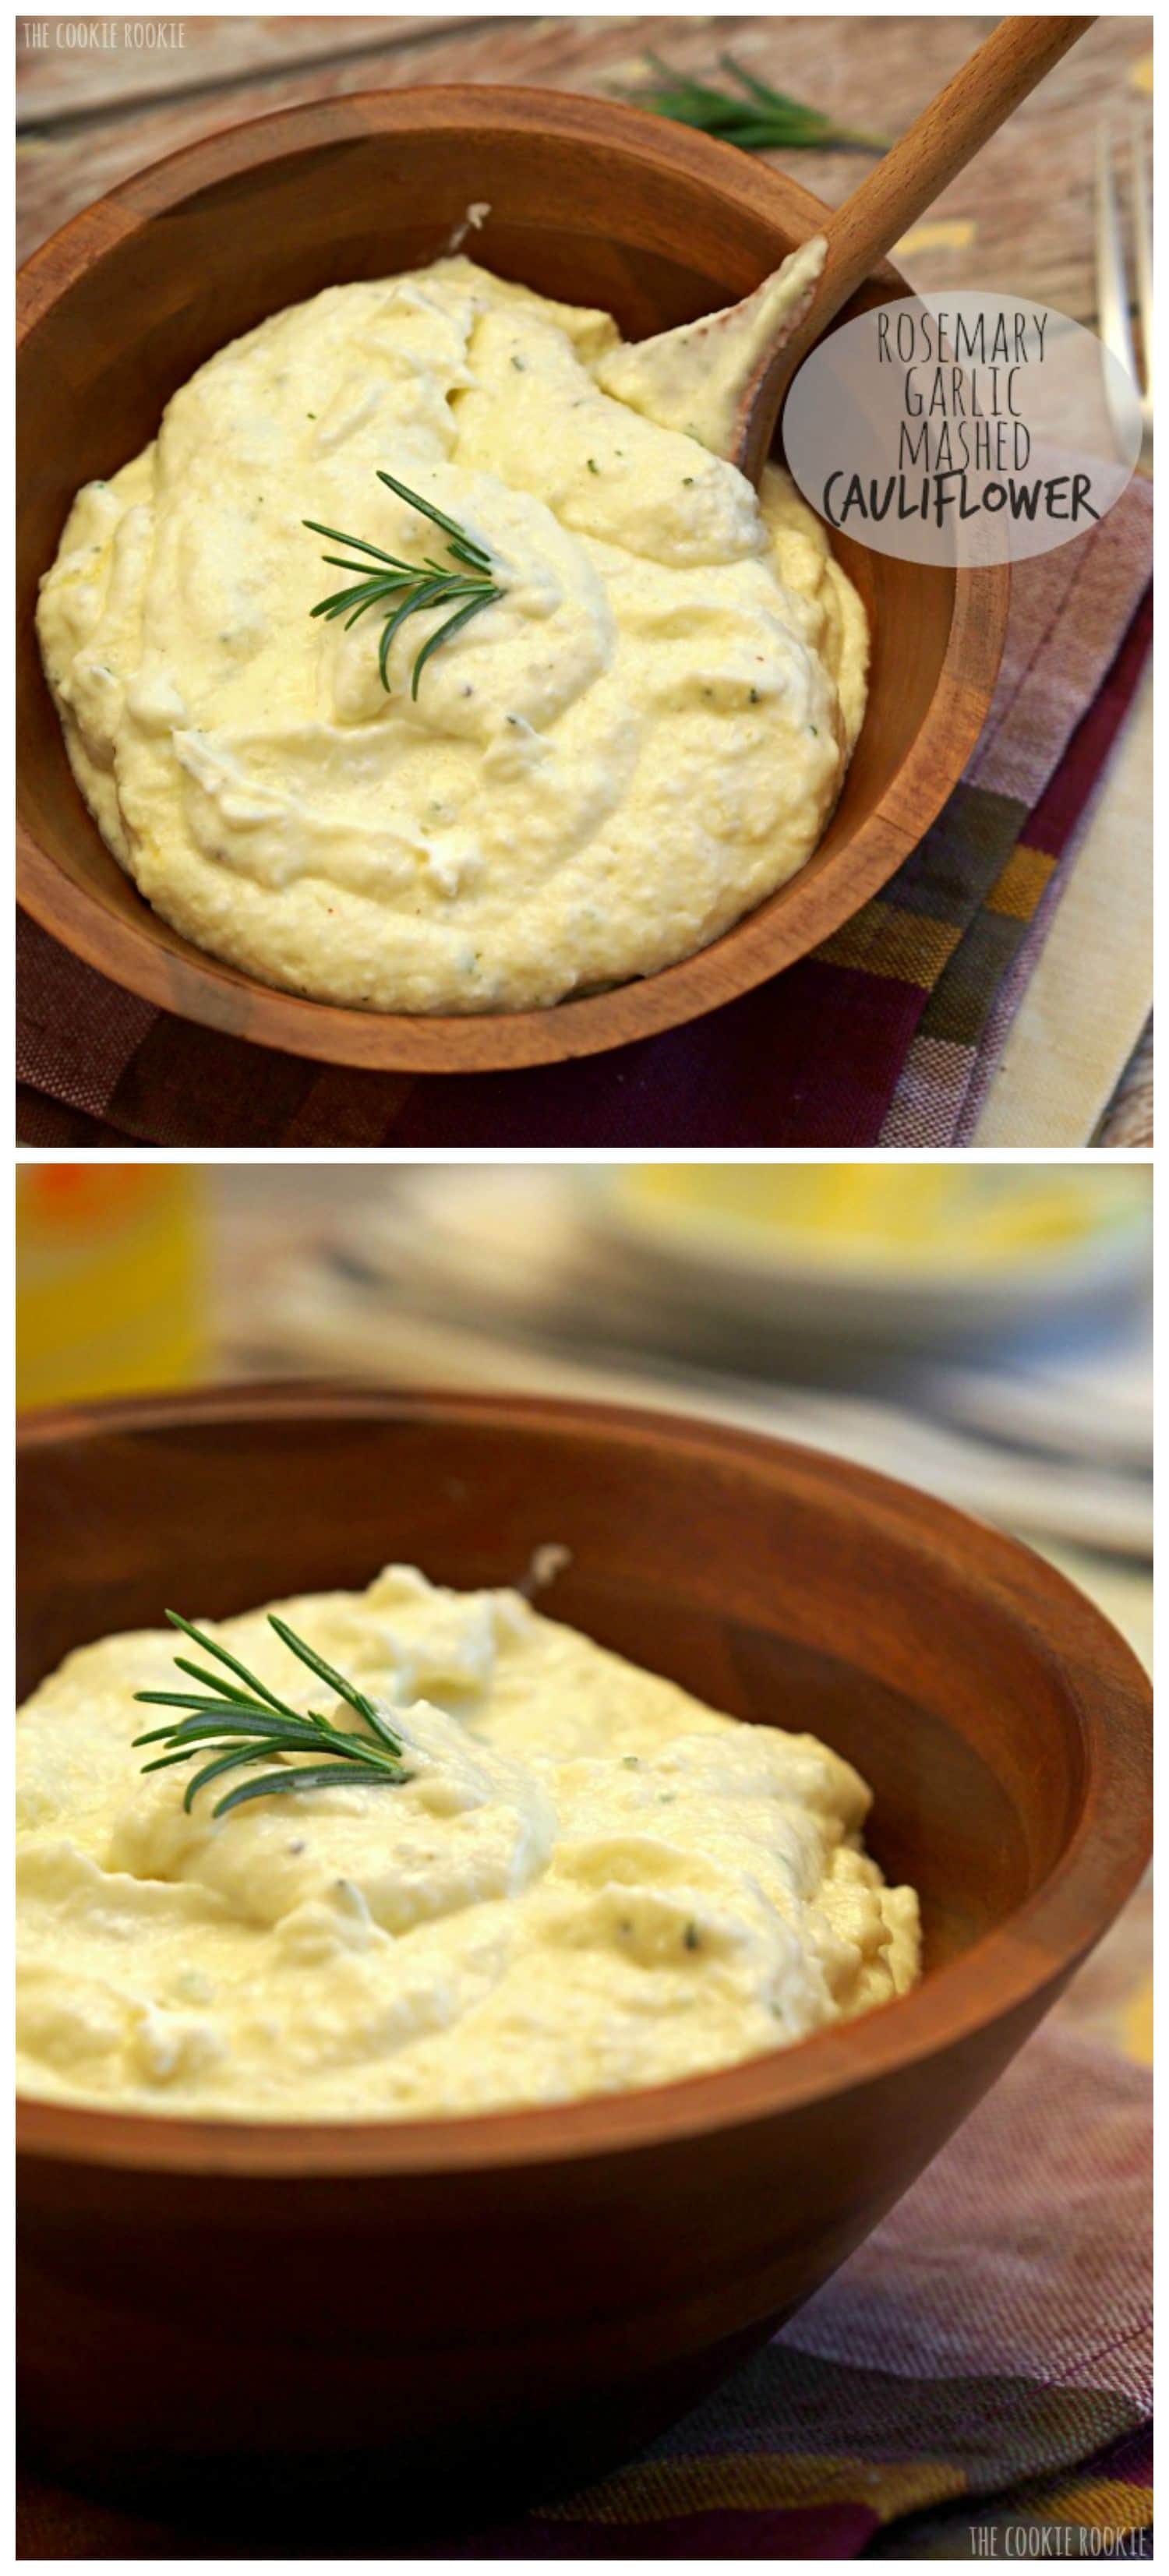 Rosemary Garlic Mashed Cauliflower! Healthy and delicious alternative to mashed potatoes. Perfect Thanksgiving side dish! | The Cookie Rookie